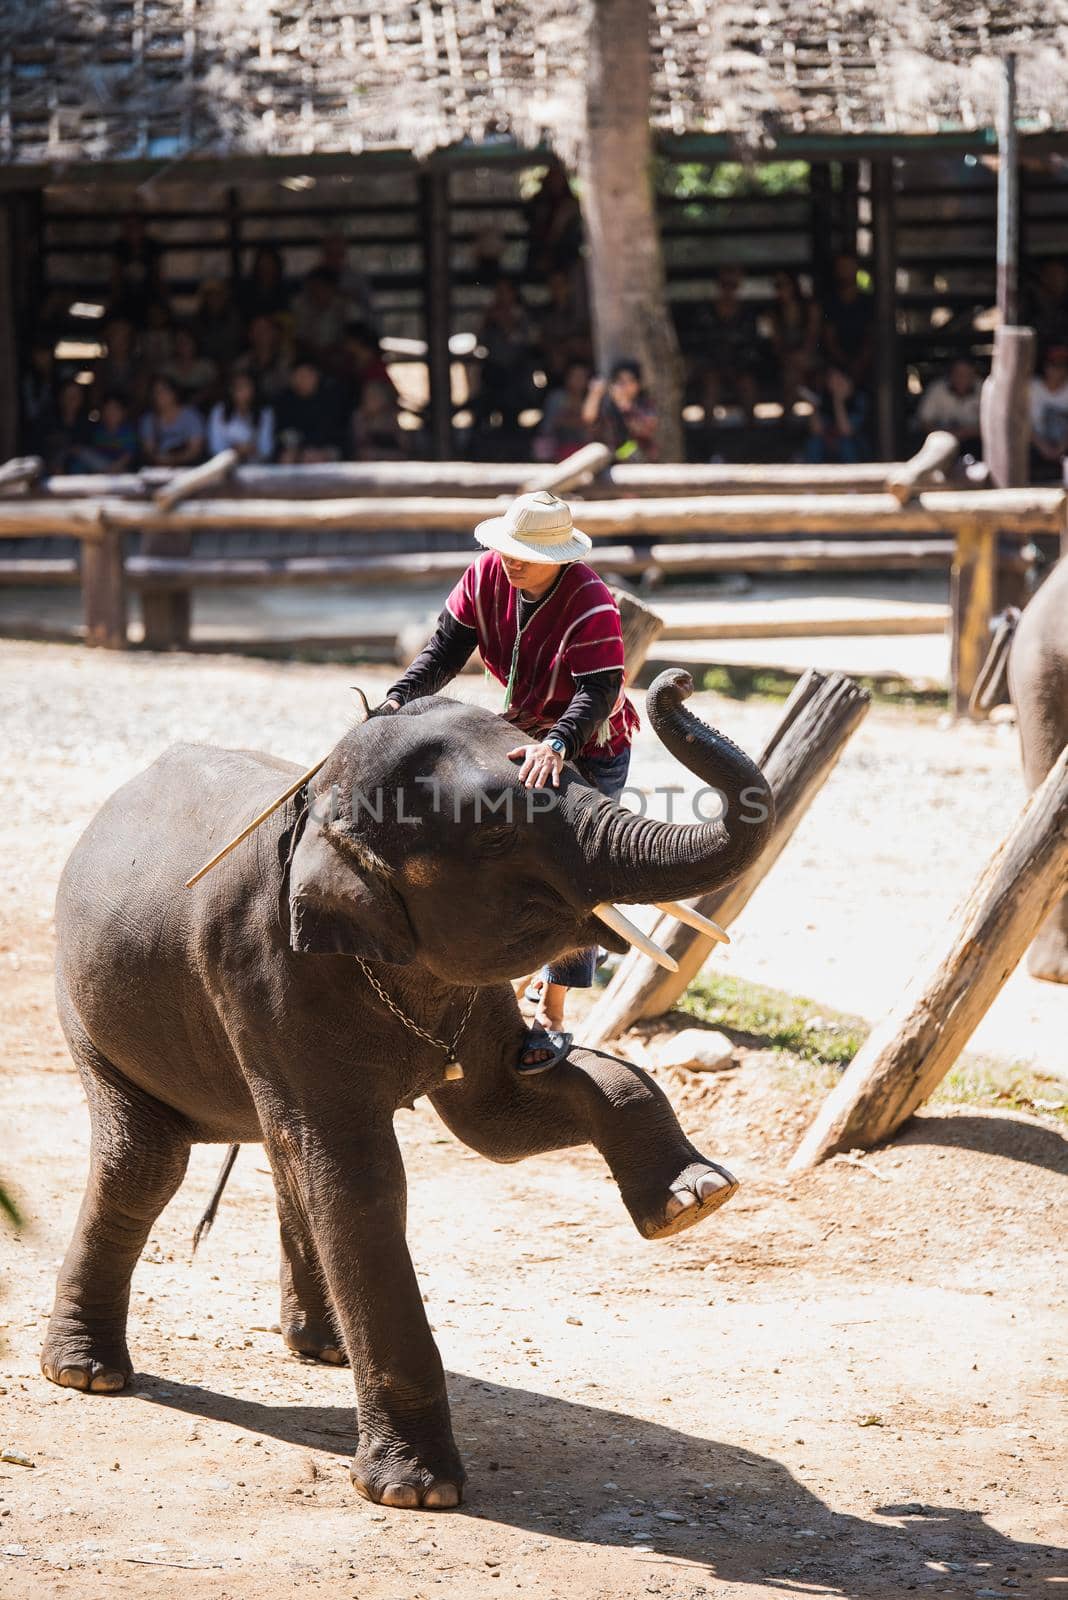 CHIANG MAI, THAILAND - JAN. 31: Daily elephant show at The Thai Elephant Conservation Center, mahout show how to ride and transport in forest, January 31, 2016 in Chiang Mai, Thailand. by Wmpix